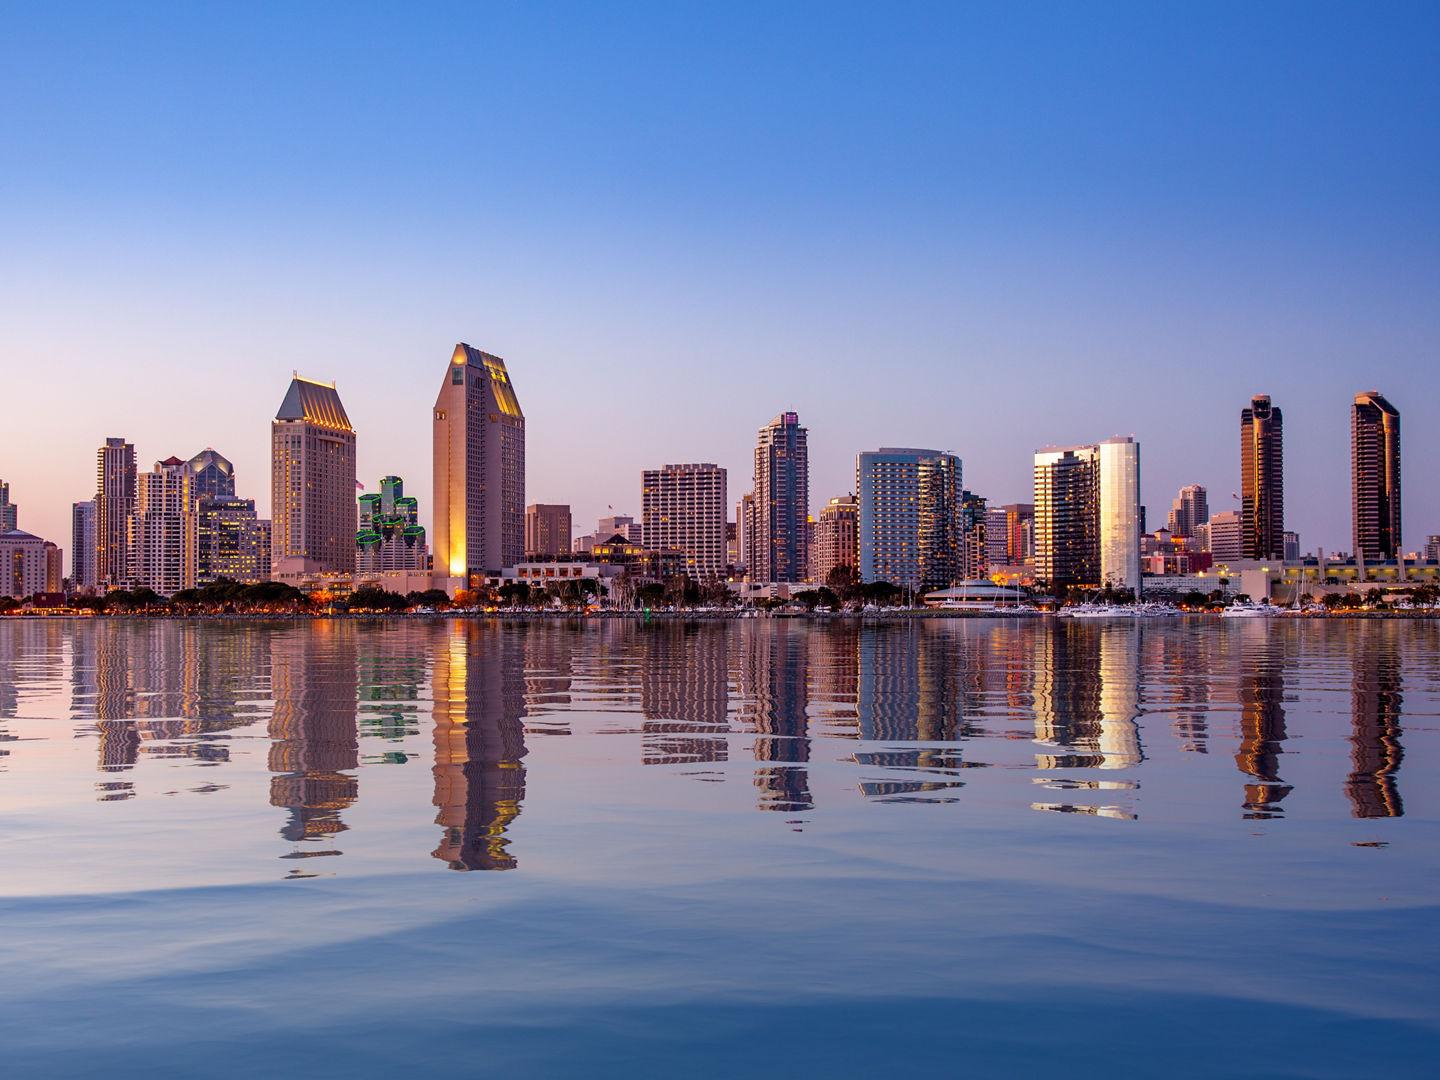 Sunset illuminating the tall skyscrapers of San Diego in California from Centennial Park in Coronado with artificial water reflection